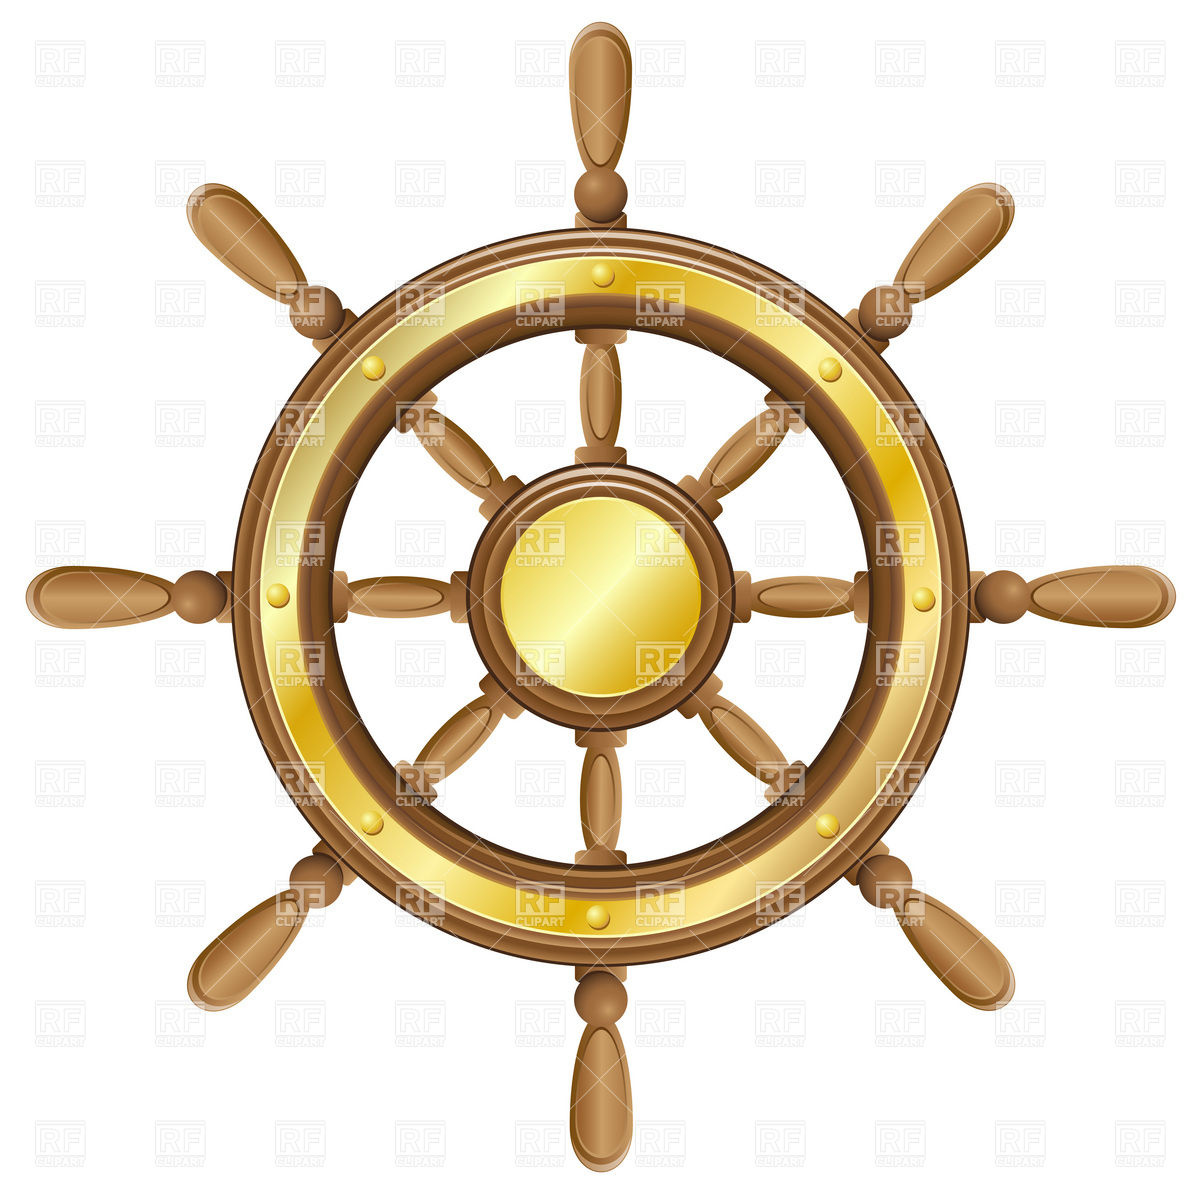 Ship Steering Wheel Download Royalty Free Vector Clipart  Eps